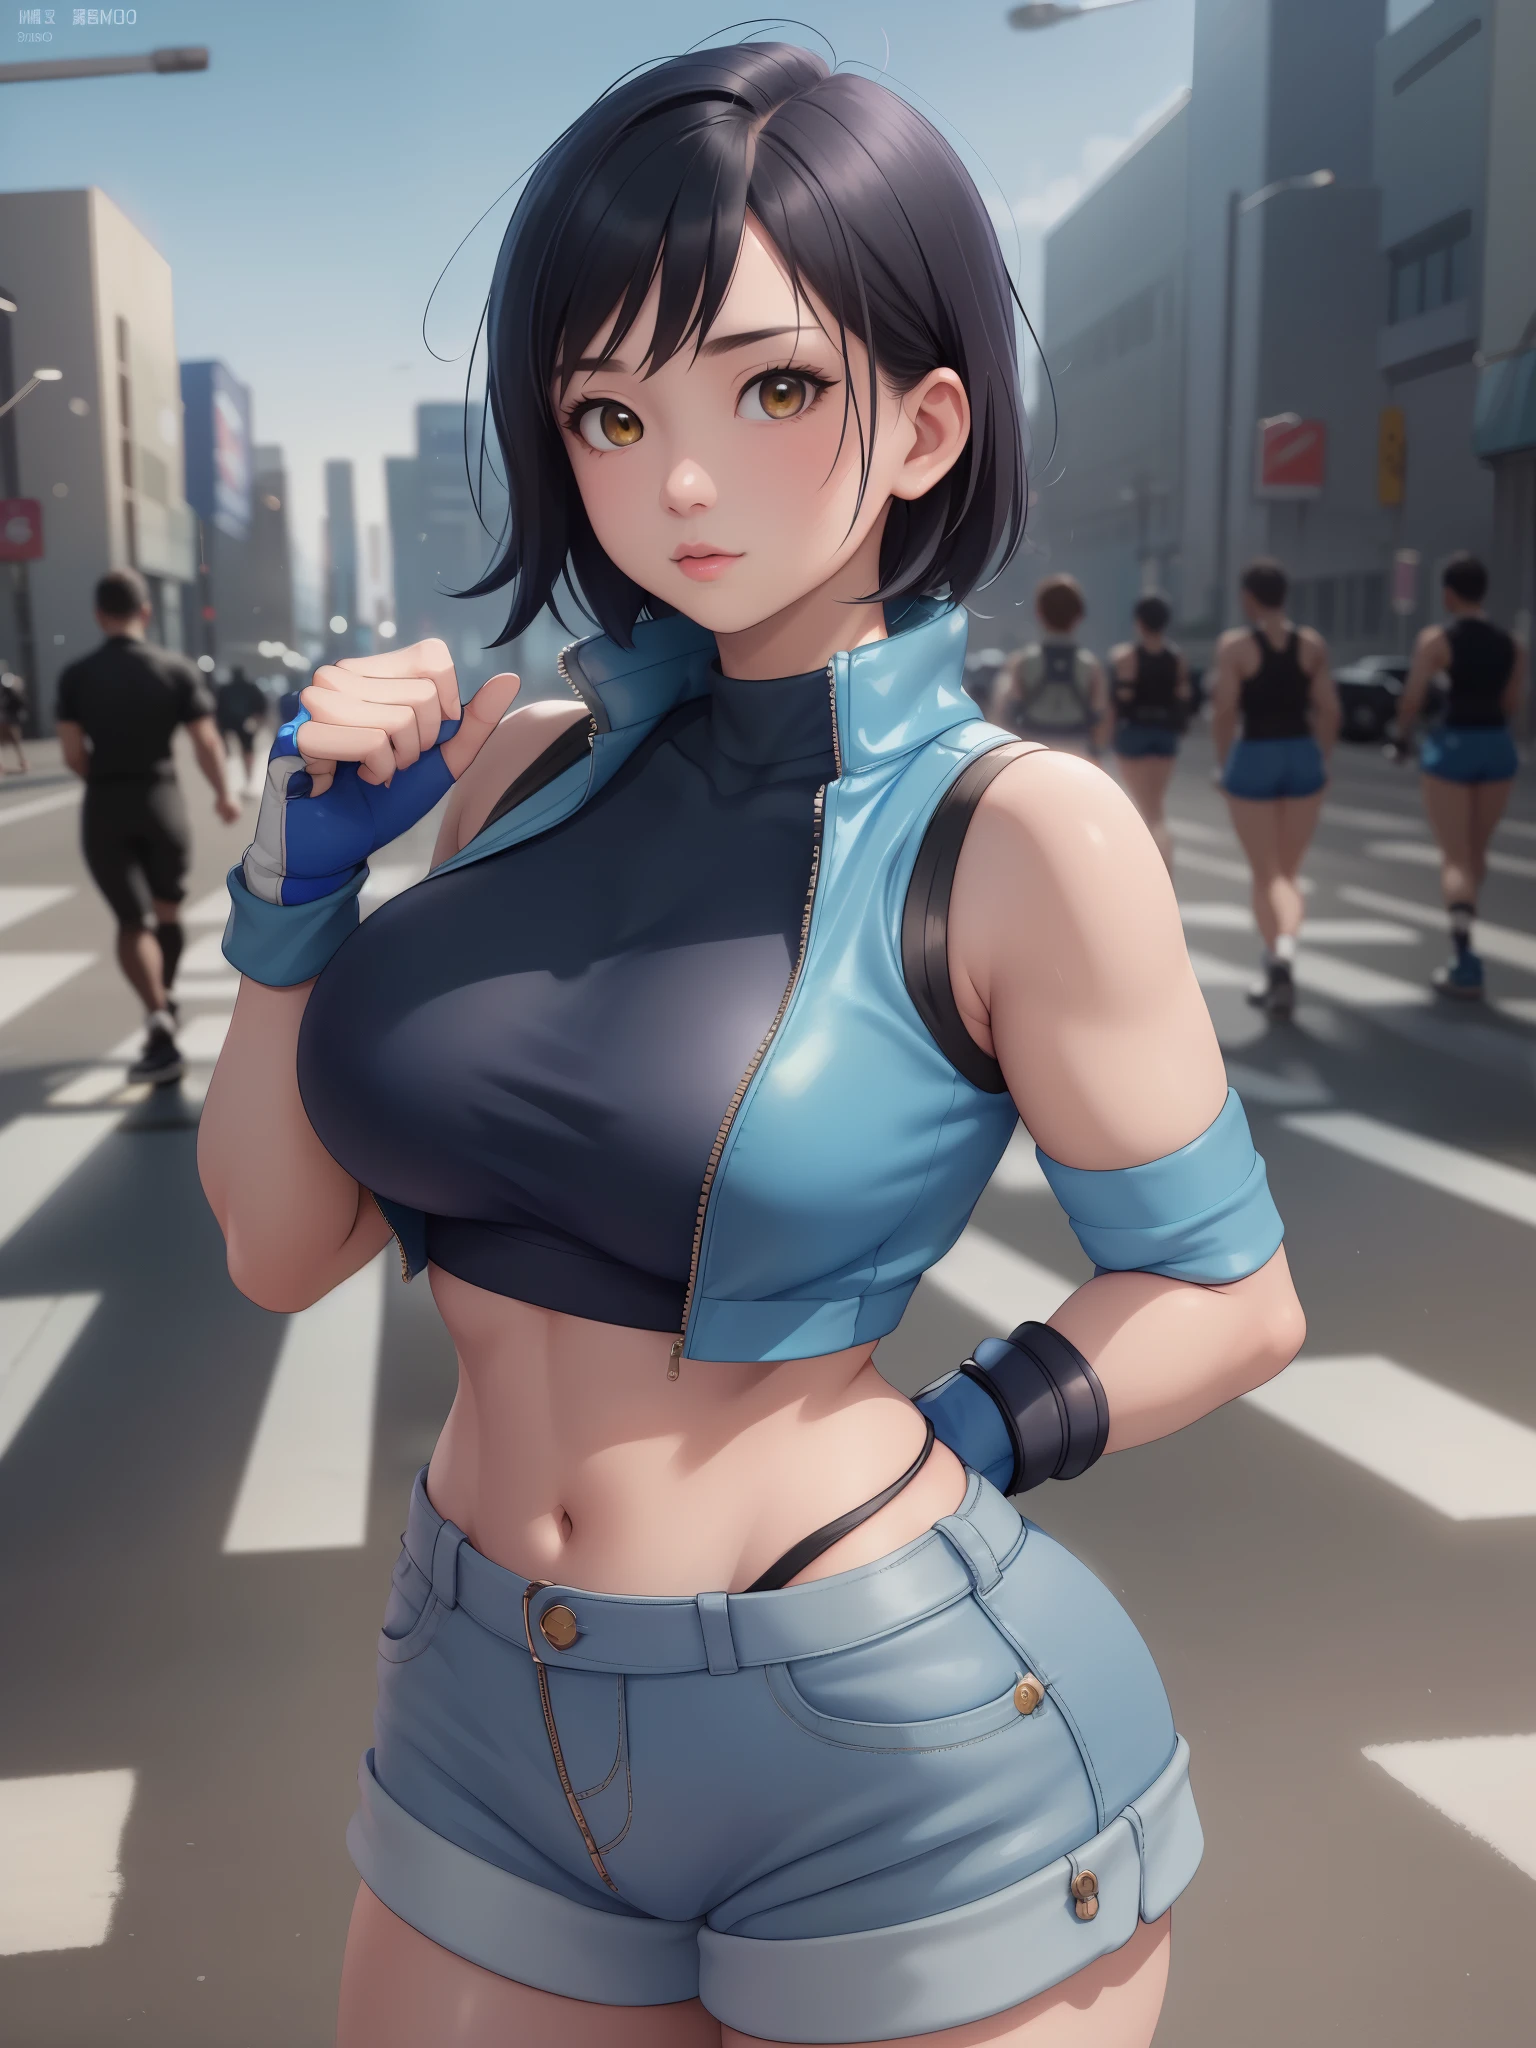 Masterpiece,8k, perfect face highly detailed,HDR, ultra realistic photoshoot, absurdres,award winning photo, extremely detailed, amazing, fine detail, 
KazAsuka, Japanese woman, blue crop top, big breasts, denim jacket and minishorts, short black hair, MMA gloves, posing for a picture, in the streets of Osaka
 